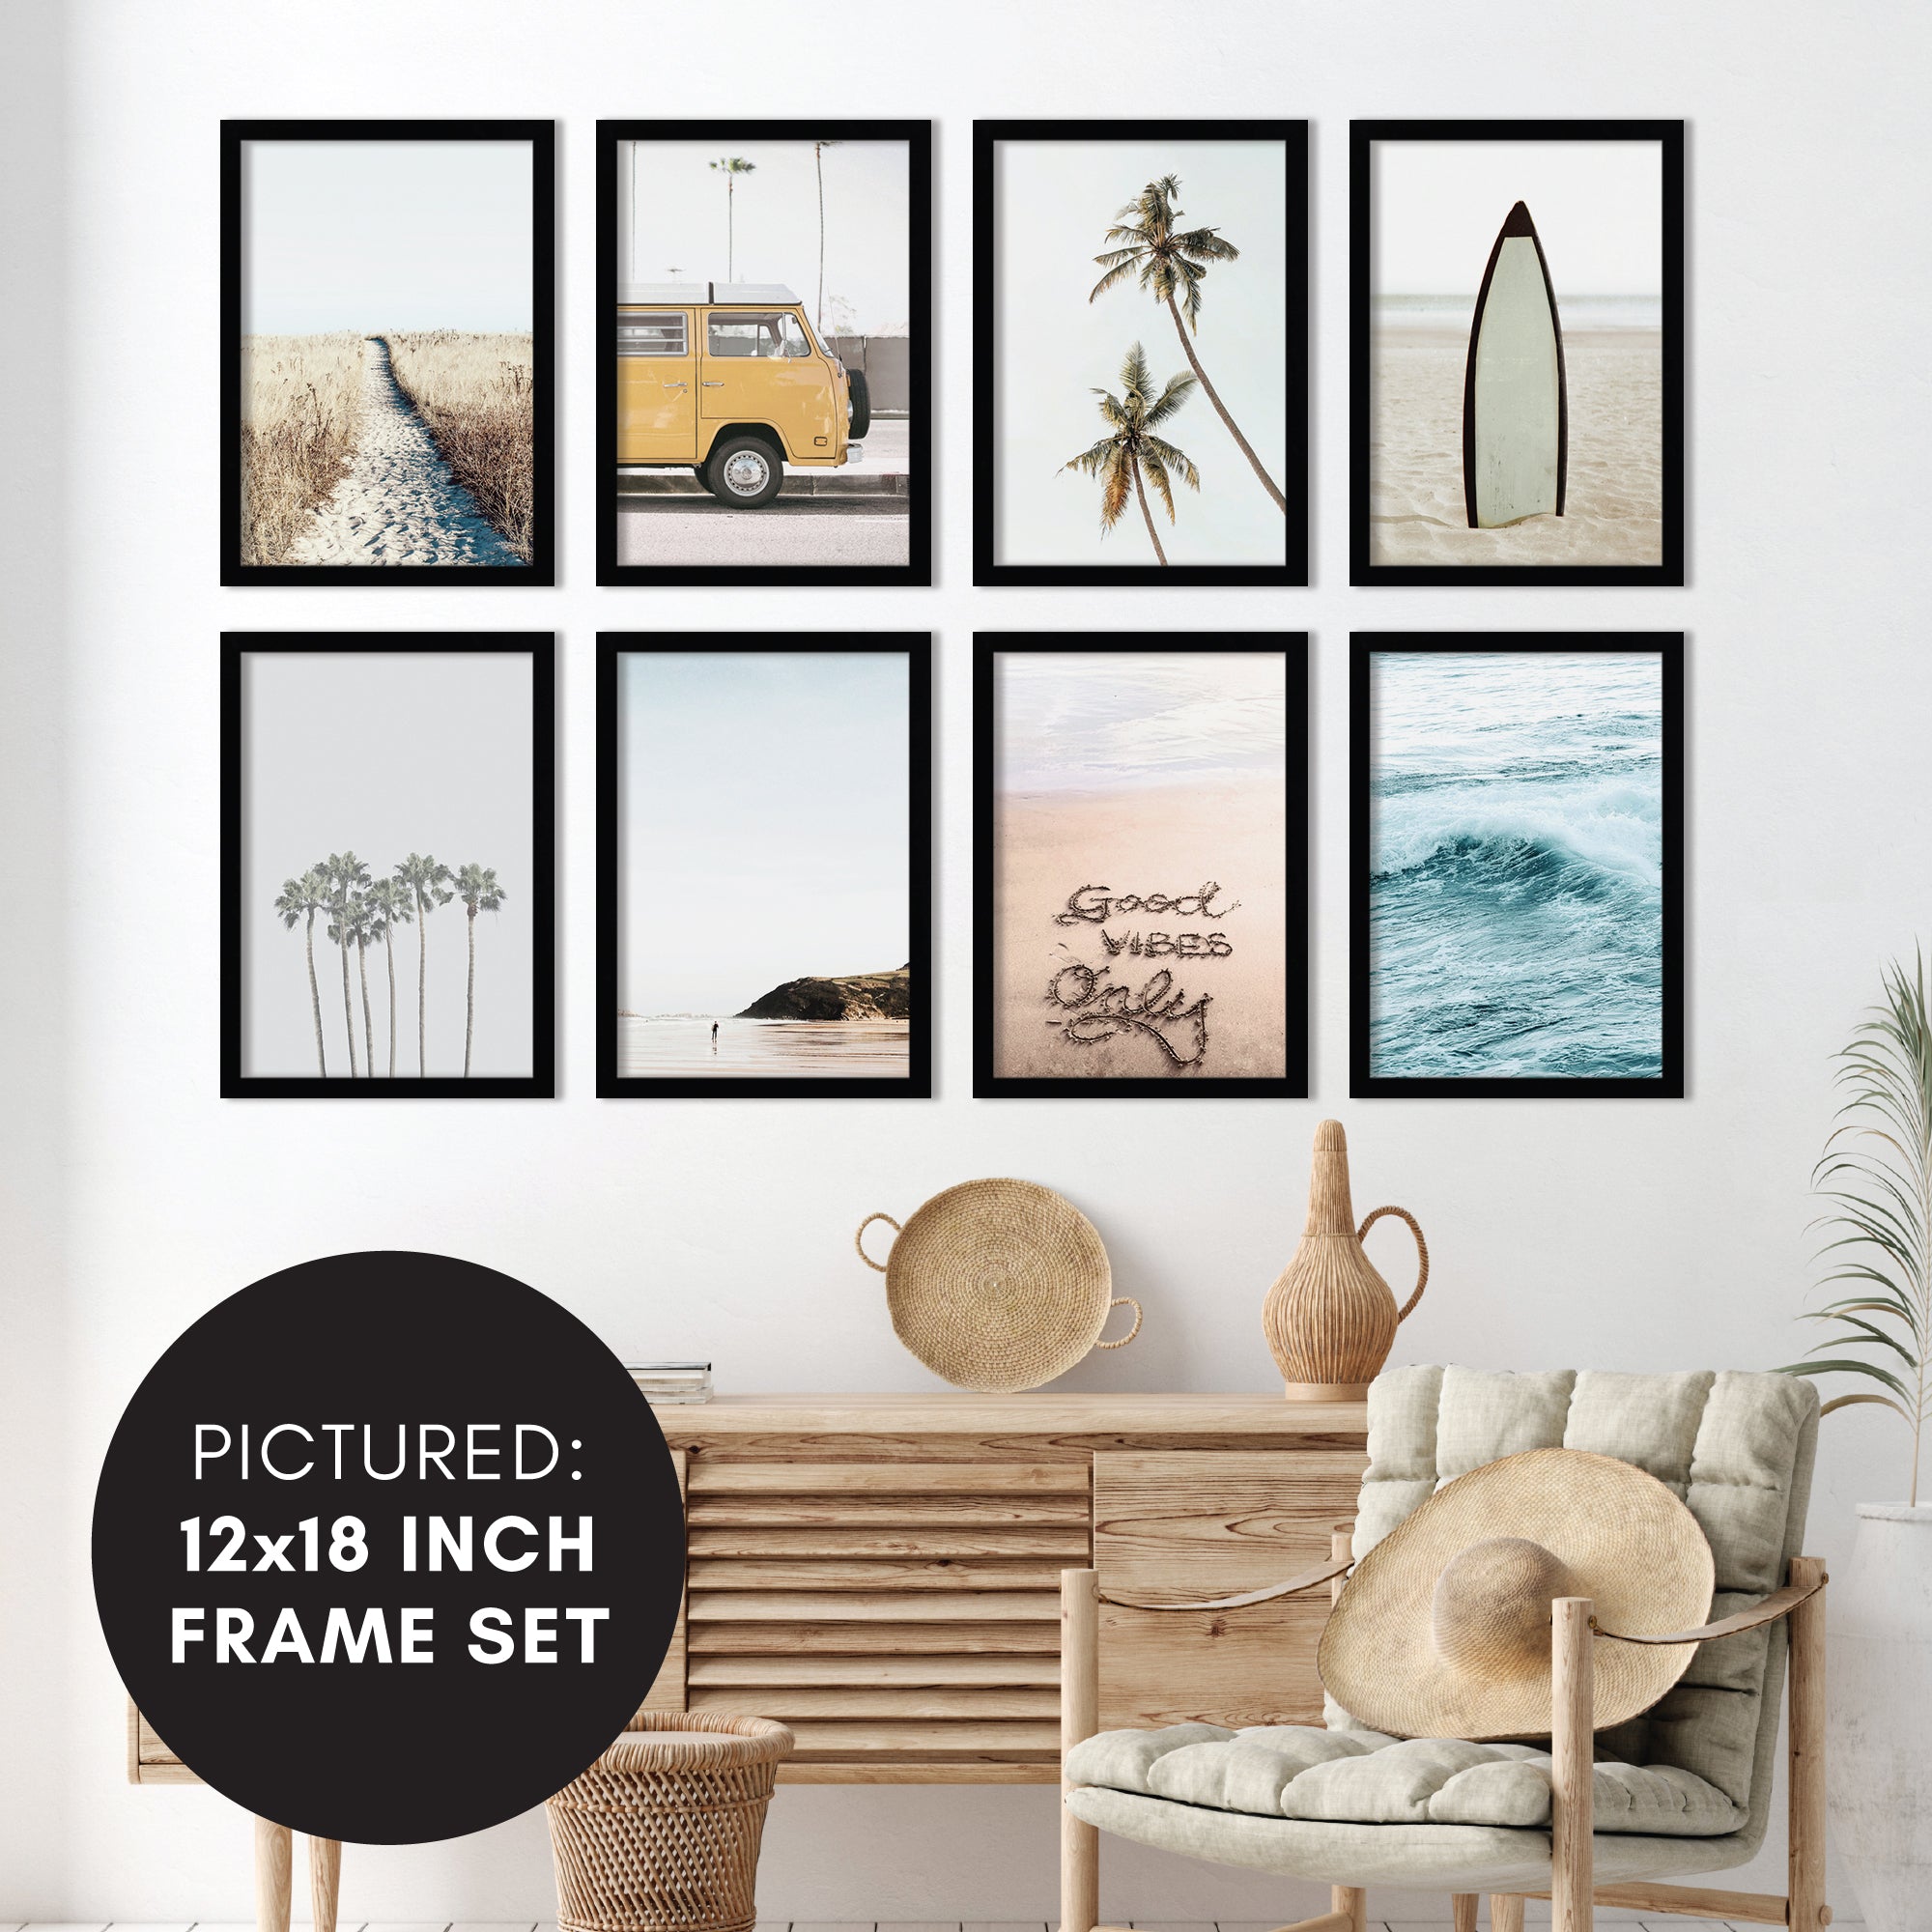 Premium Art Sets for Your Home Decor | Americanflat – Page 6